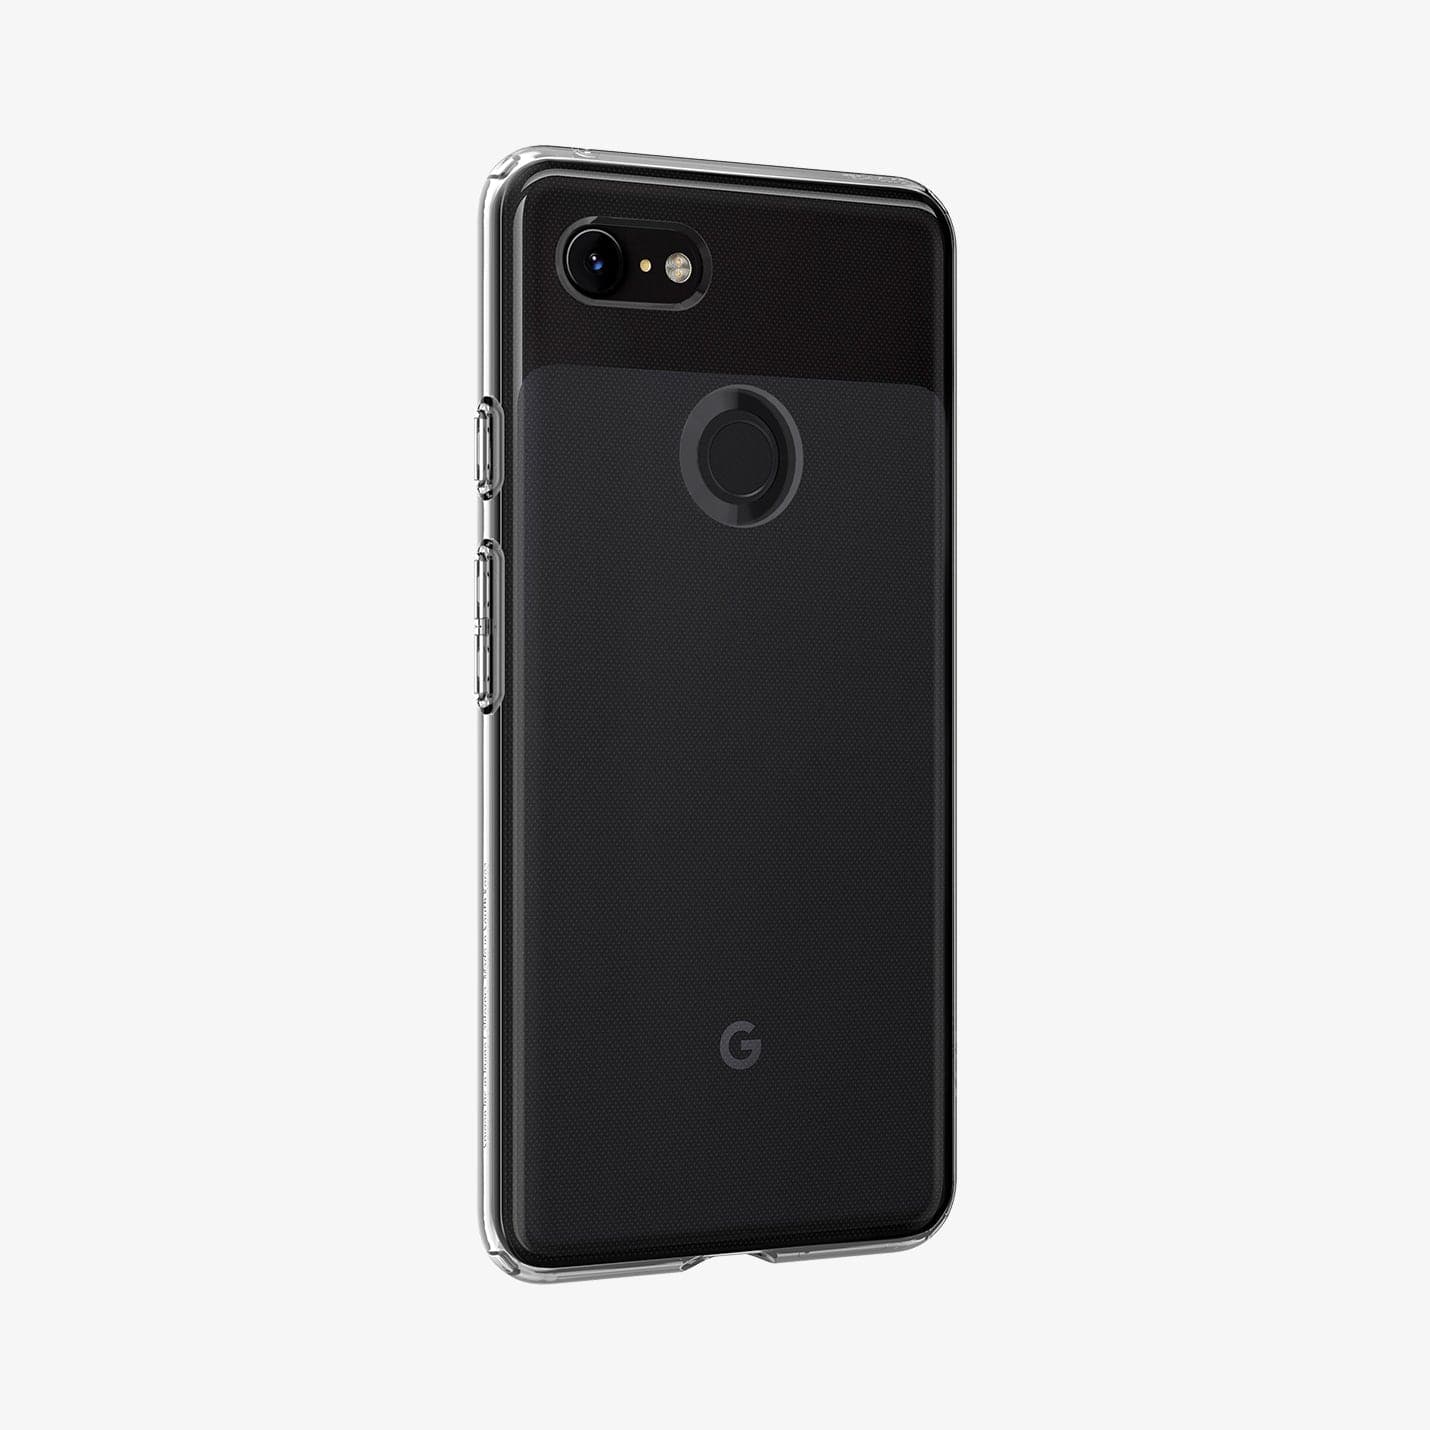 F19CS25032 - Pixel 3 Case Liquid Crystal in crystal clear showing the back and partial side